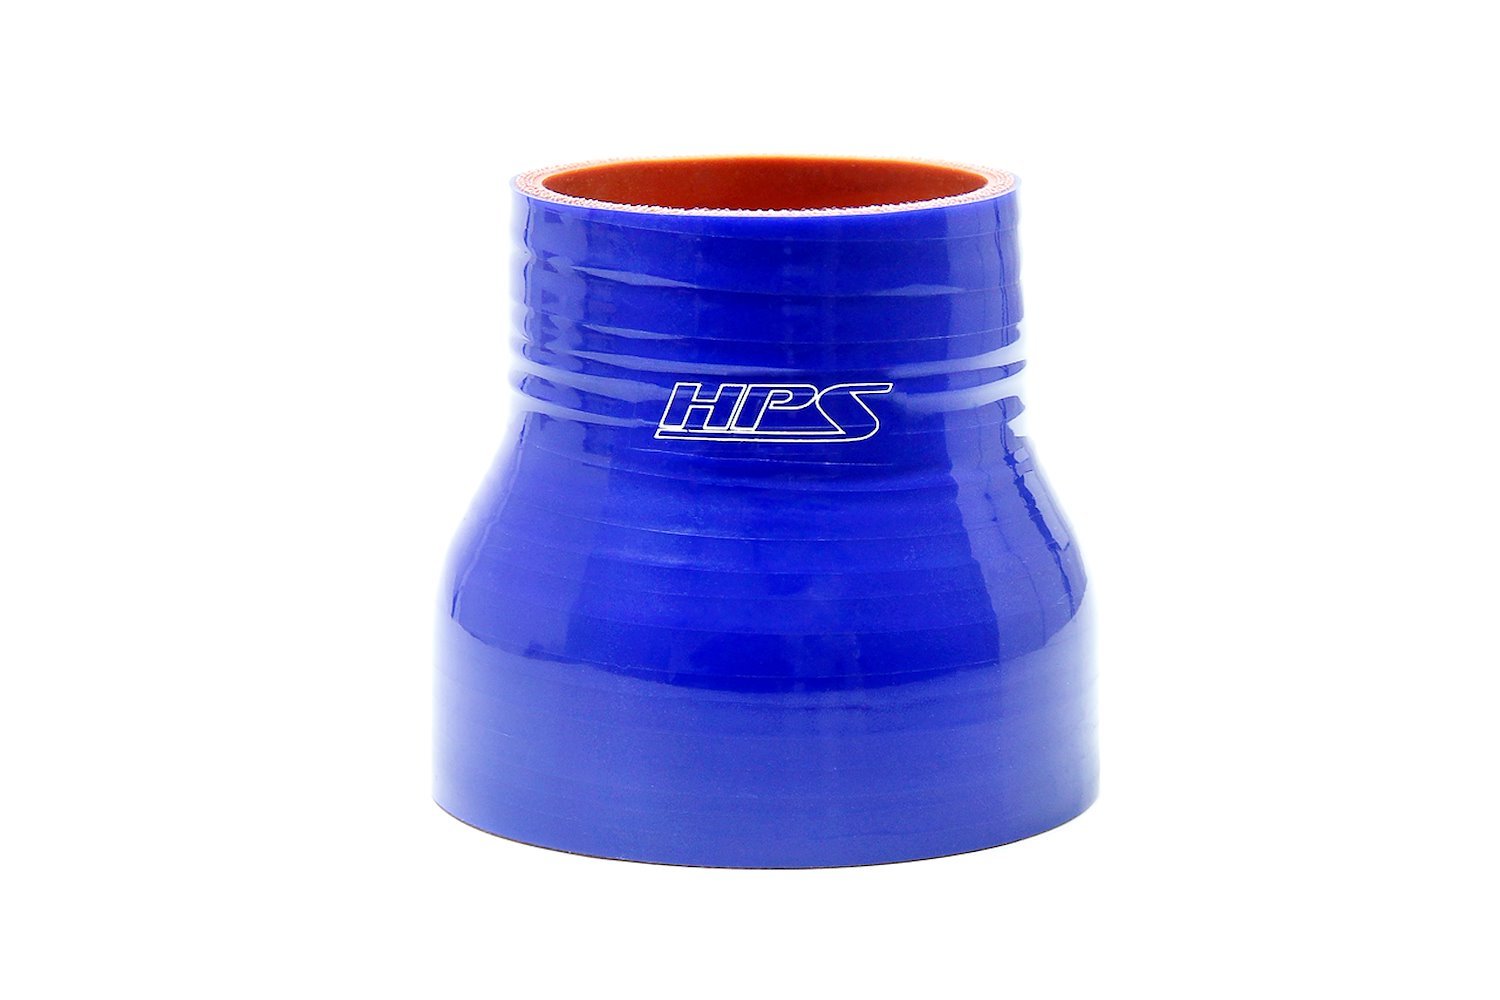 HTSR-238-250-L4-BLUE Silicone Reducer Hose, High-Temp 4-Ply Reinforced, 2-3/8 in. - 2-1/2 in. ID, 4 in. Long, Blue